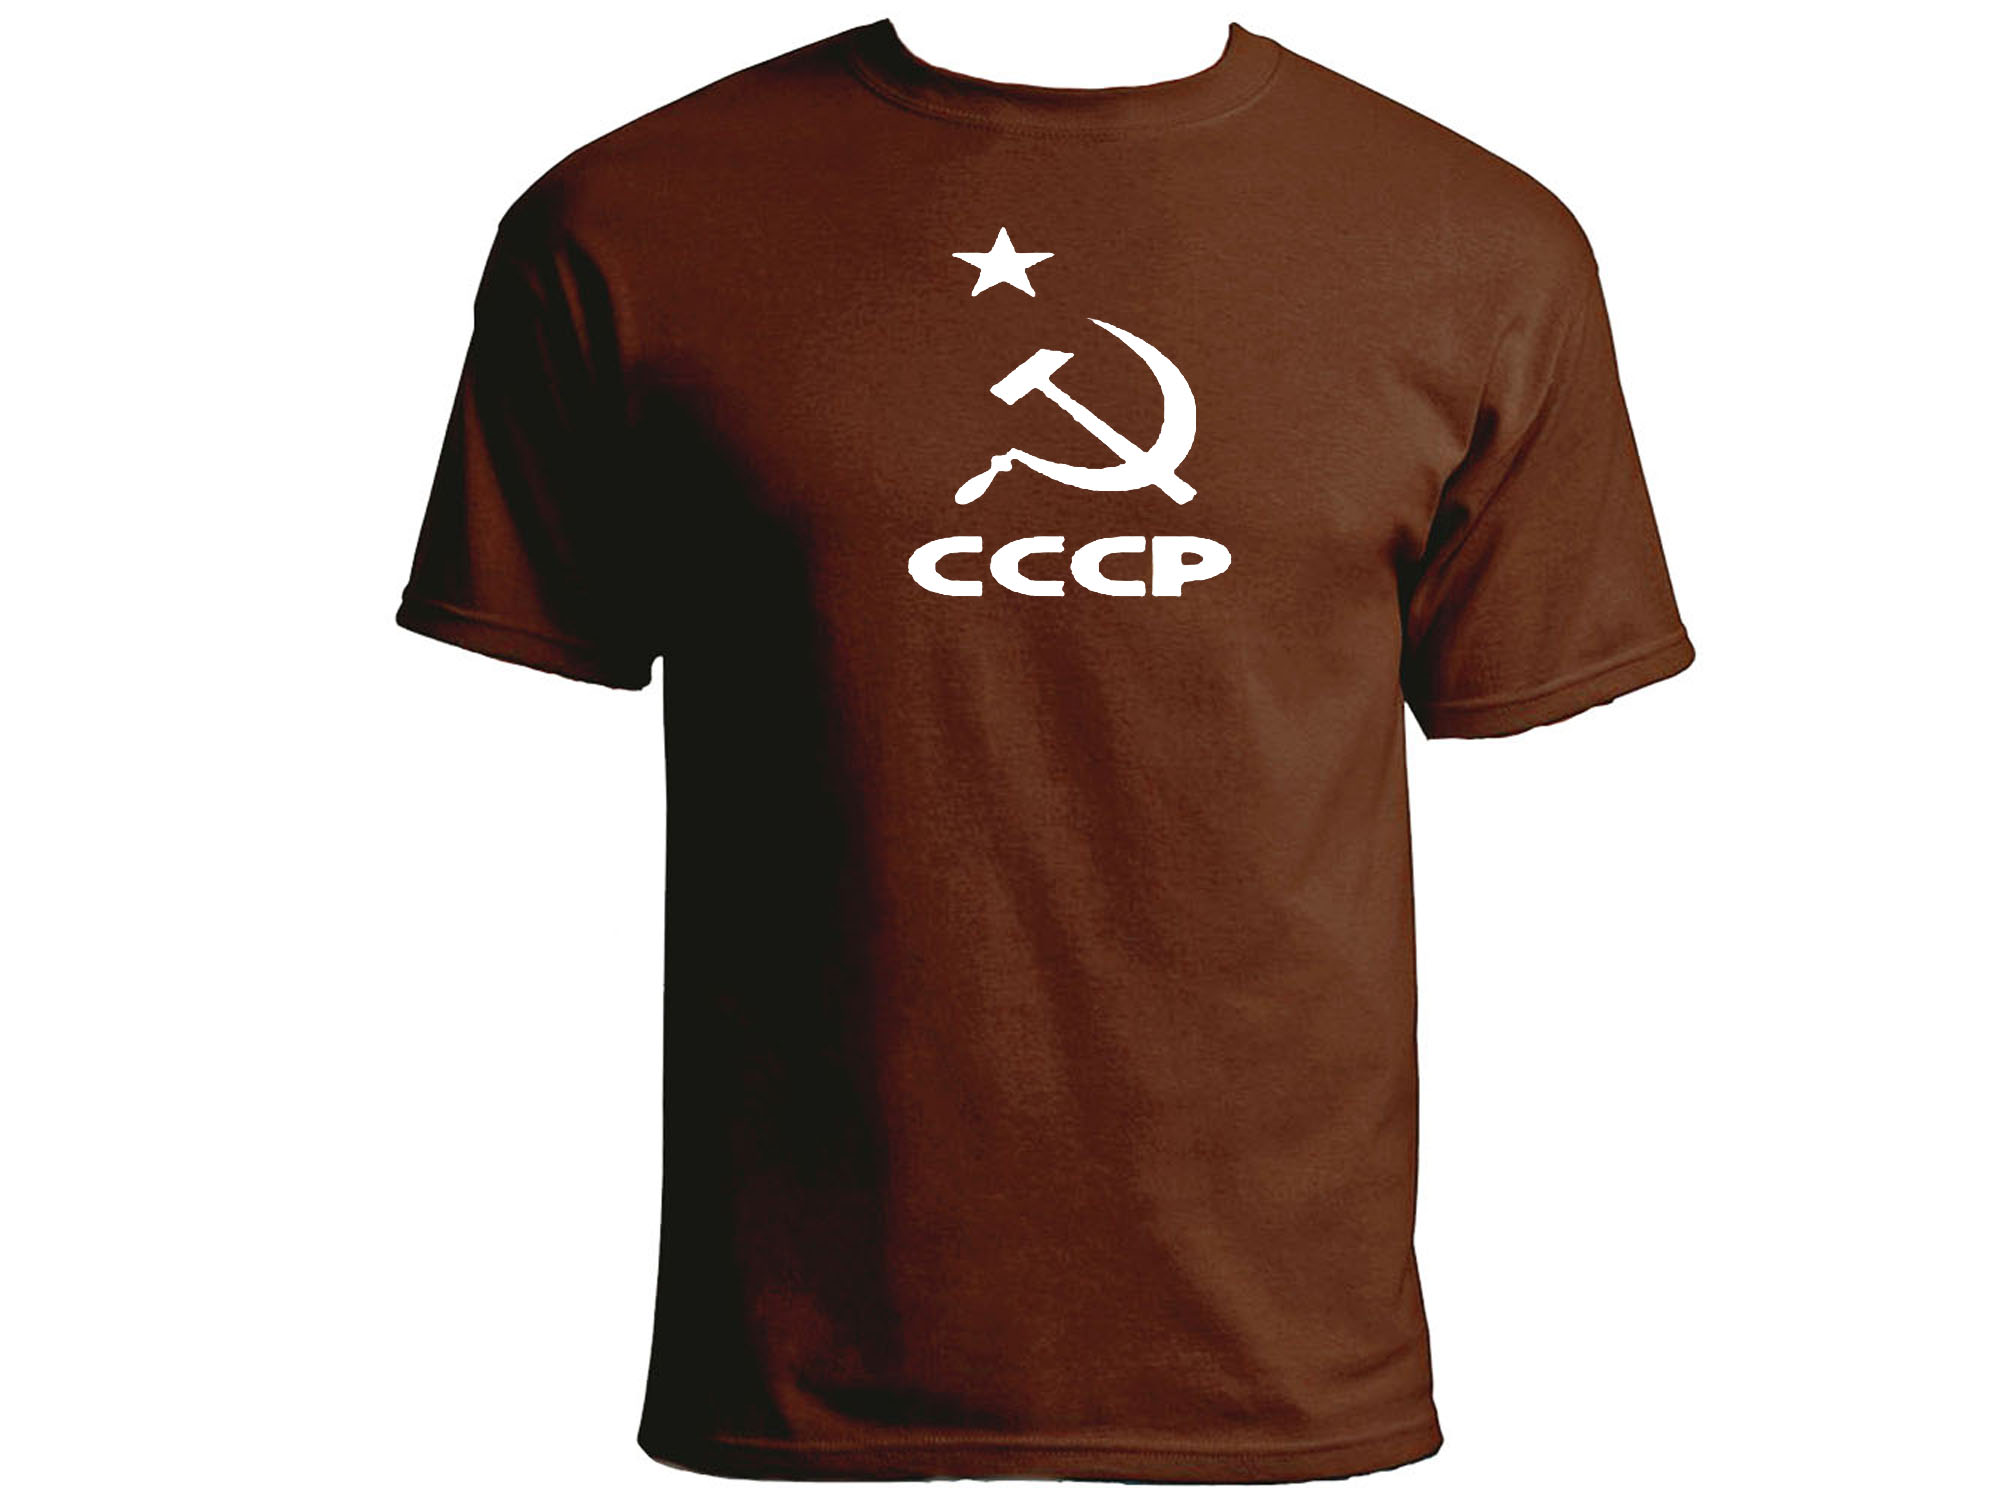 USSR CCCR soviet national symbols - Hammer and sickle brown t-shirt